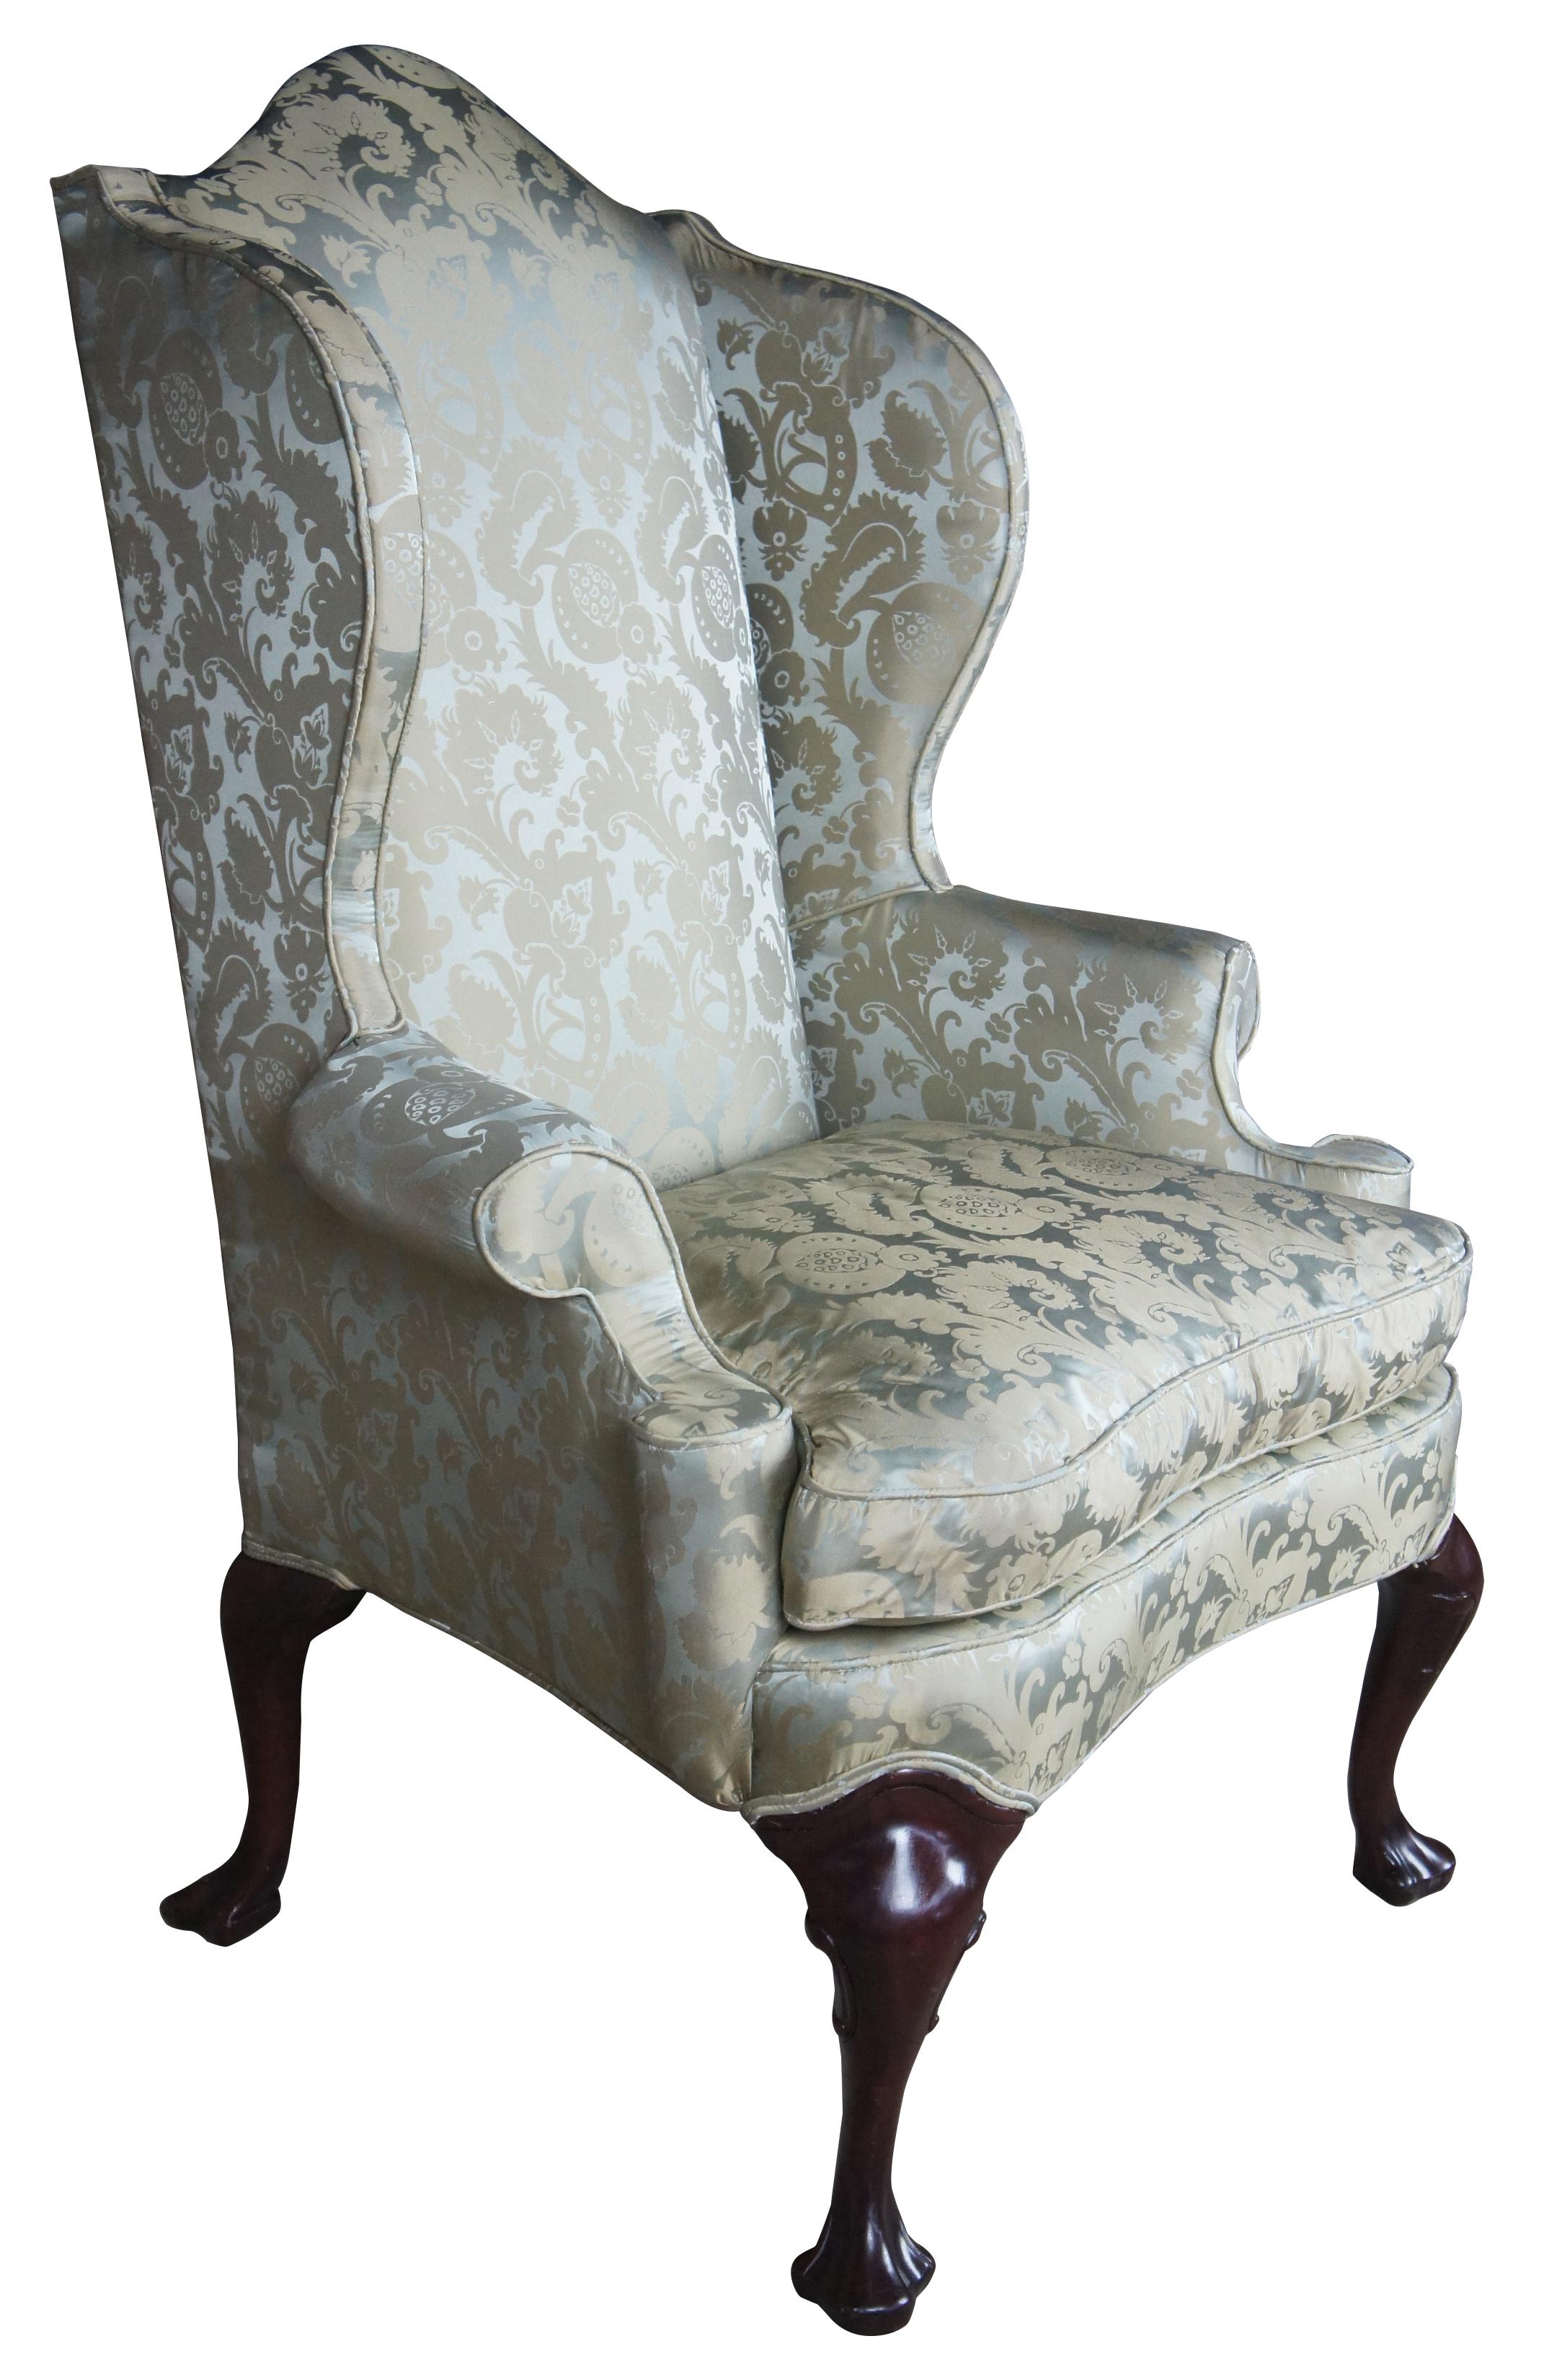 2 Antique Queen Anne Mahogany Wingback Arm Chairs Chippendale Damask Fabric

Queen Anne inspired wing-back armchair duo with Damask upholstery and cabriole legs in mahogany that lead to a trifid foot. 
